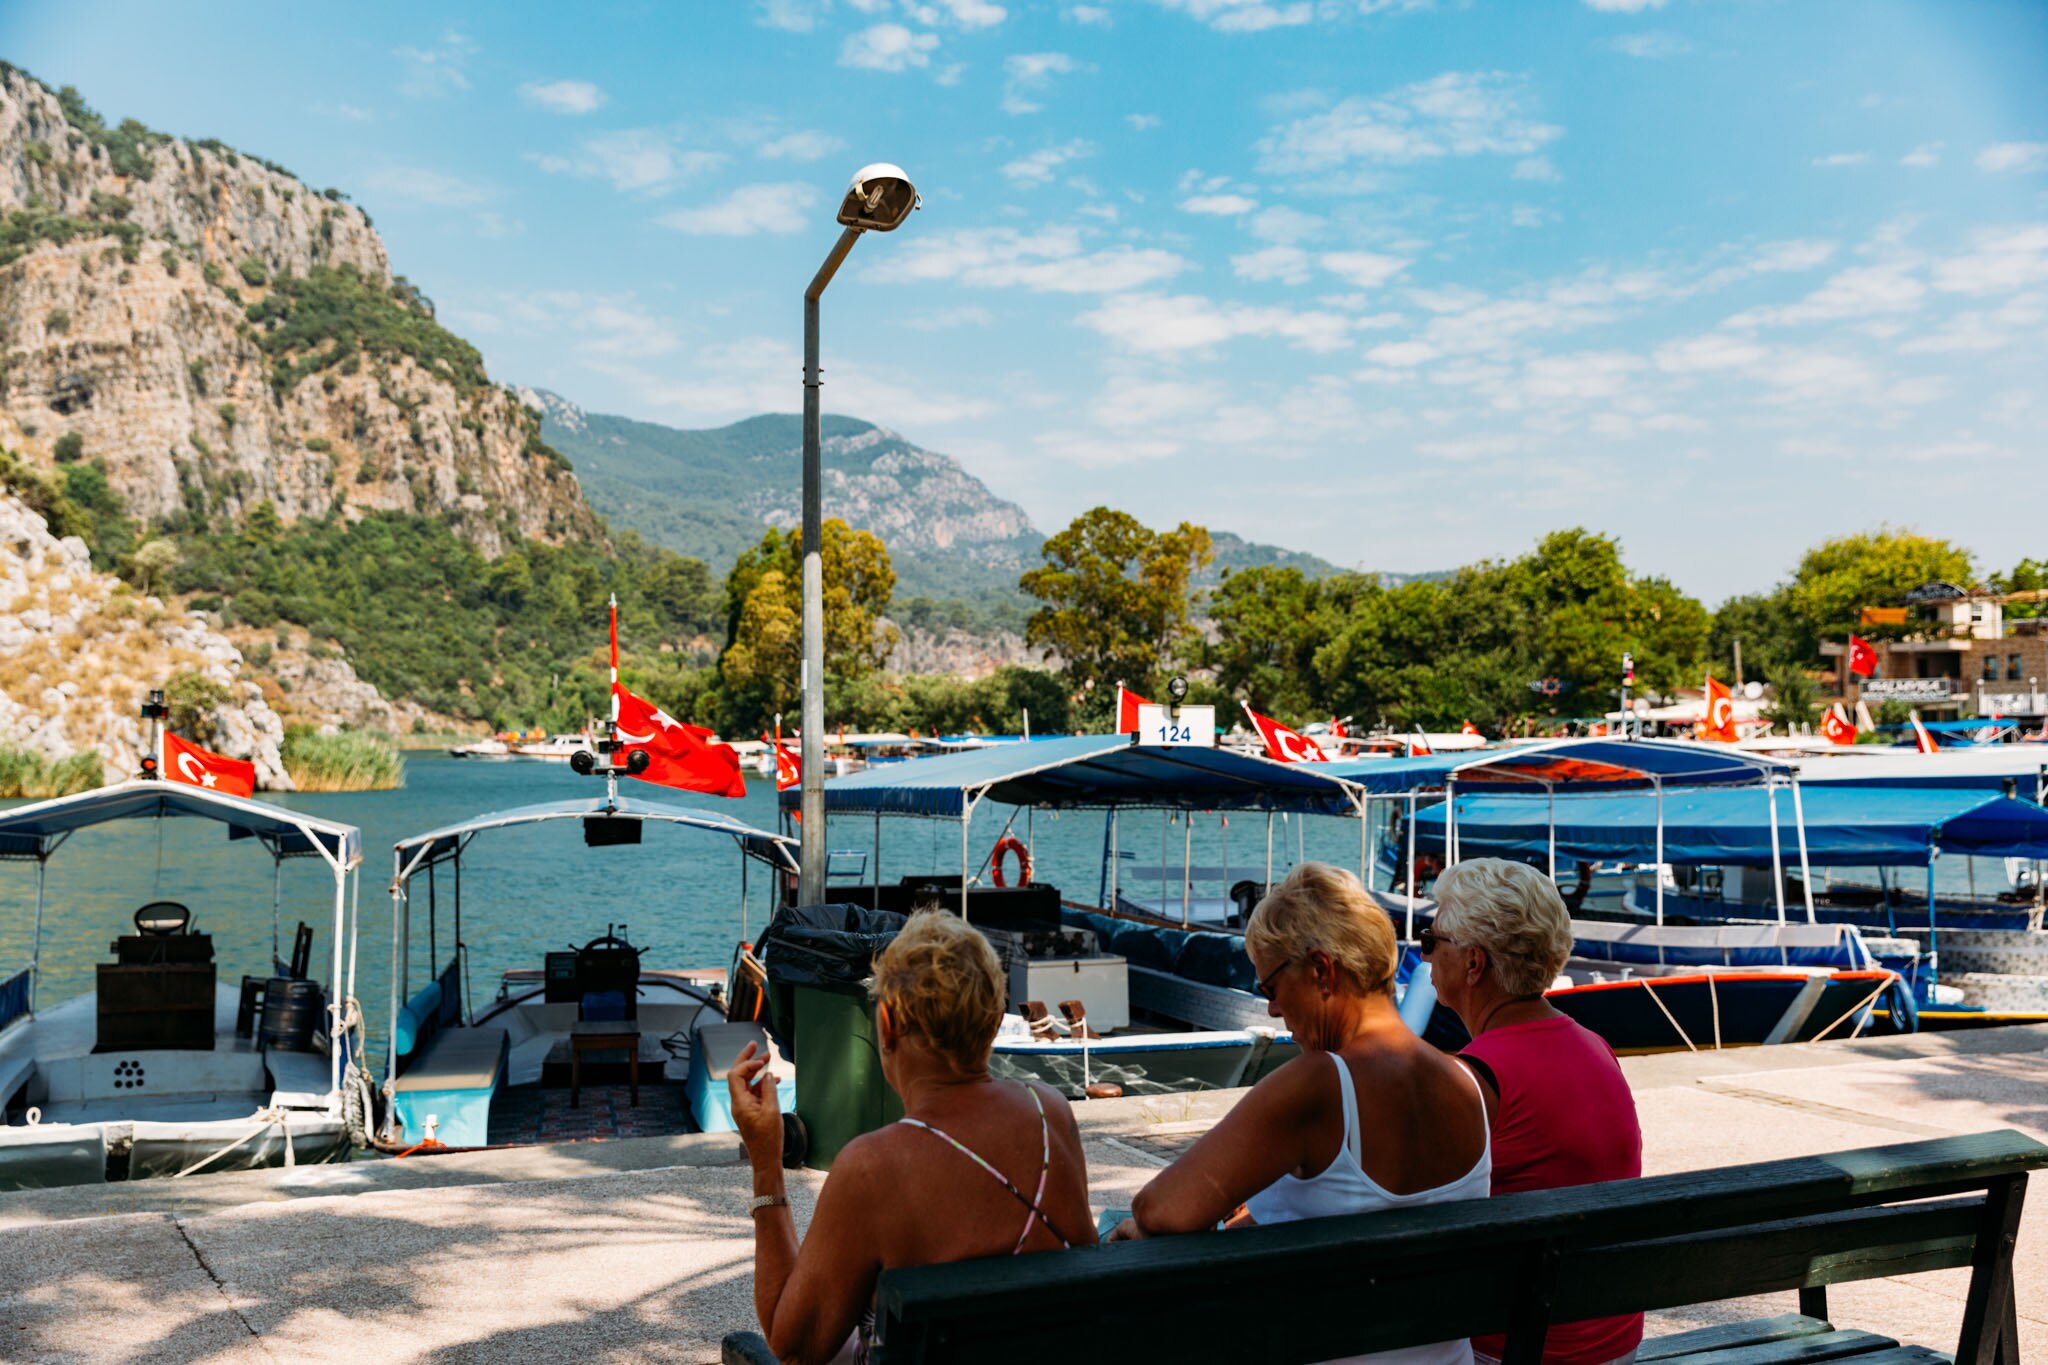 Spend a day in Dalyan